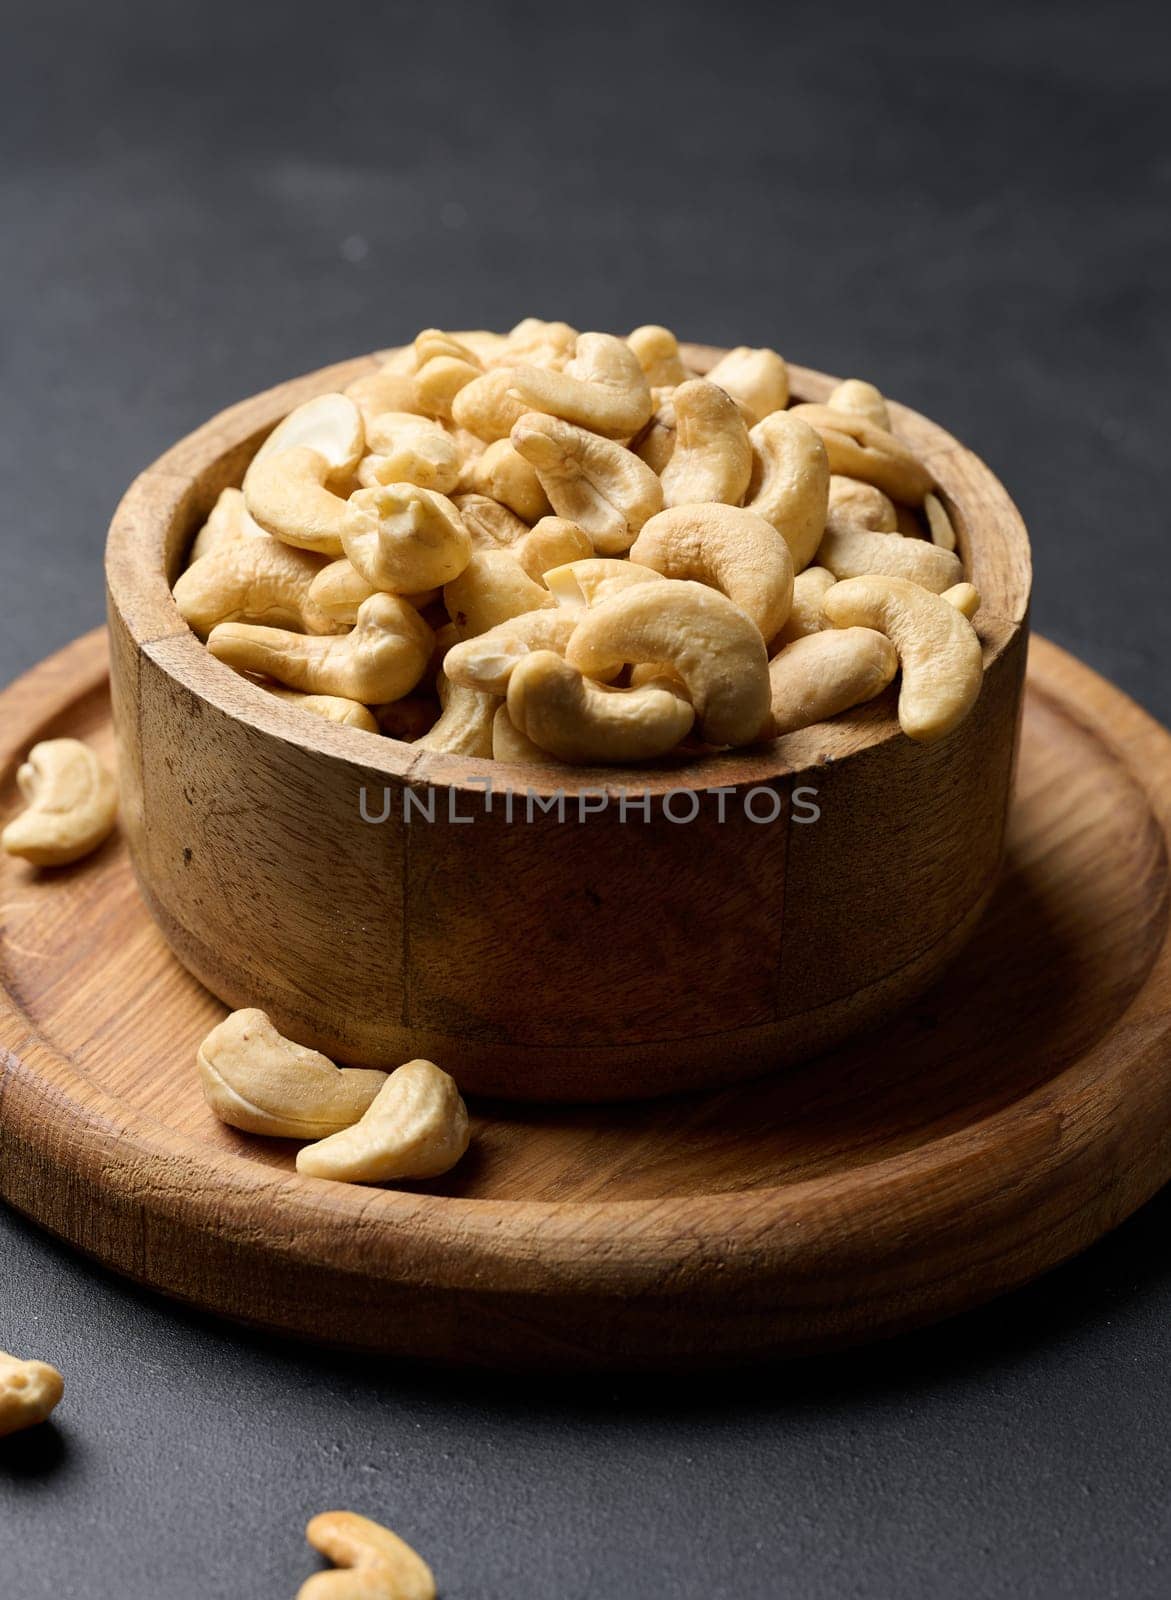 Cashews in a wooden bowl on the table